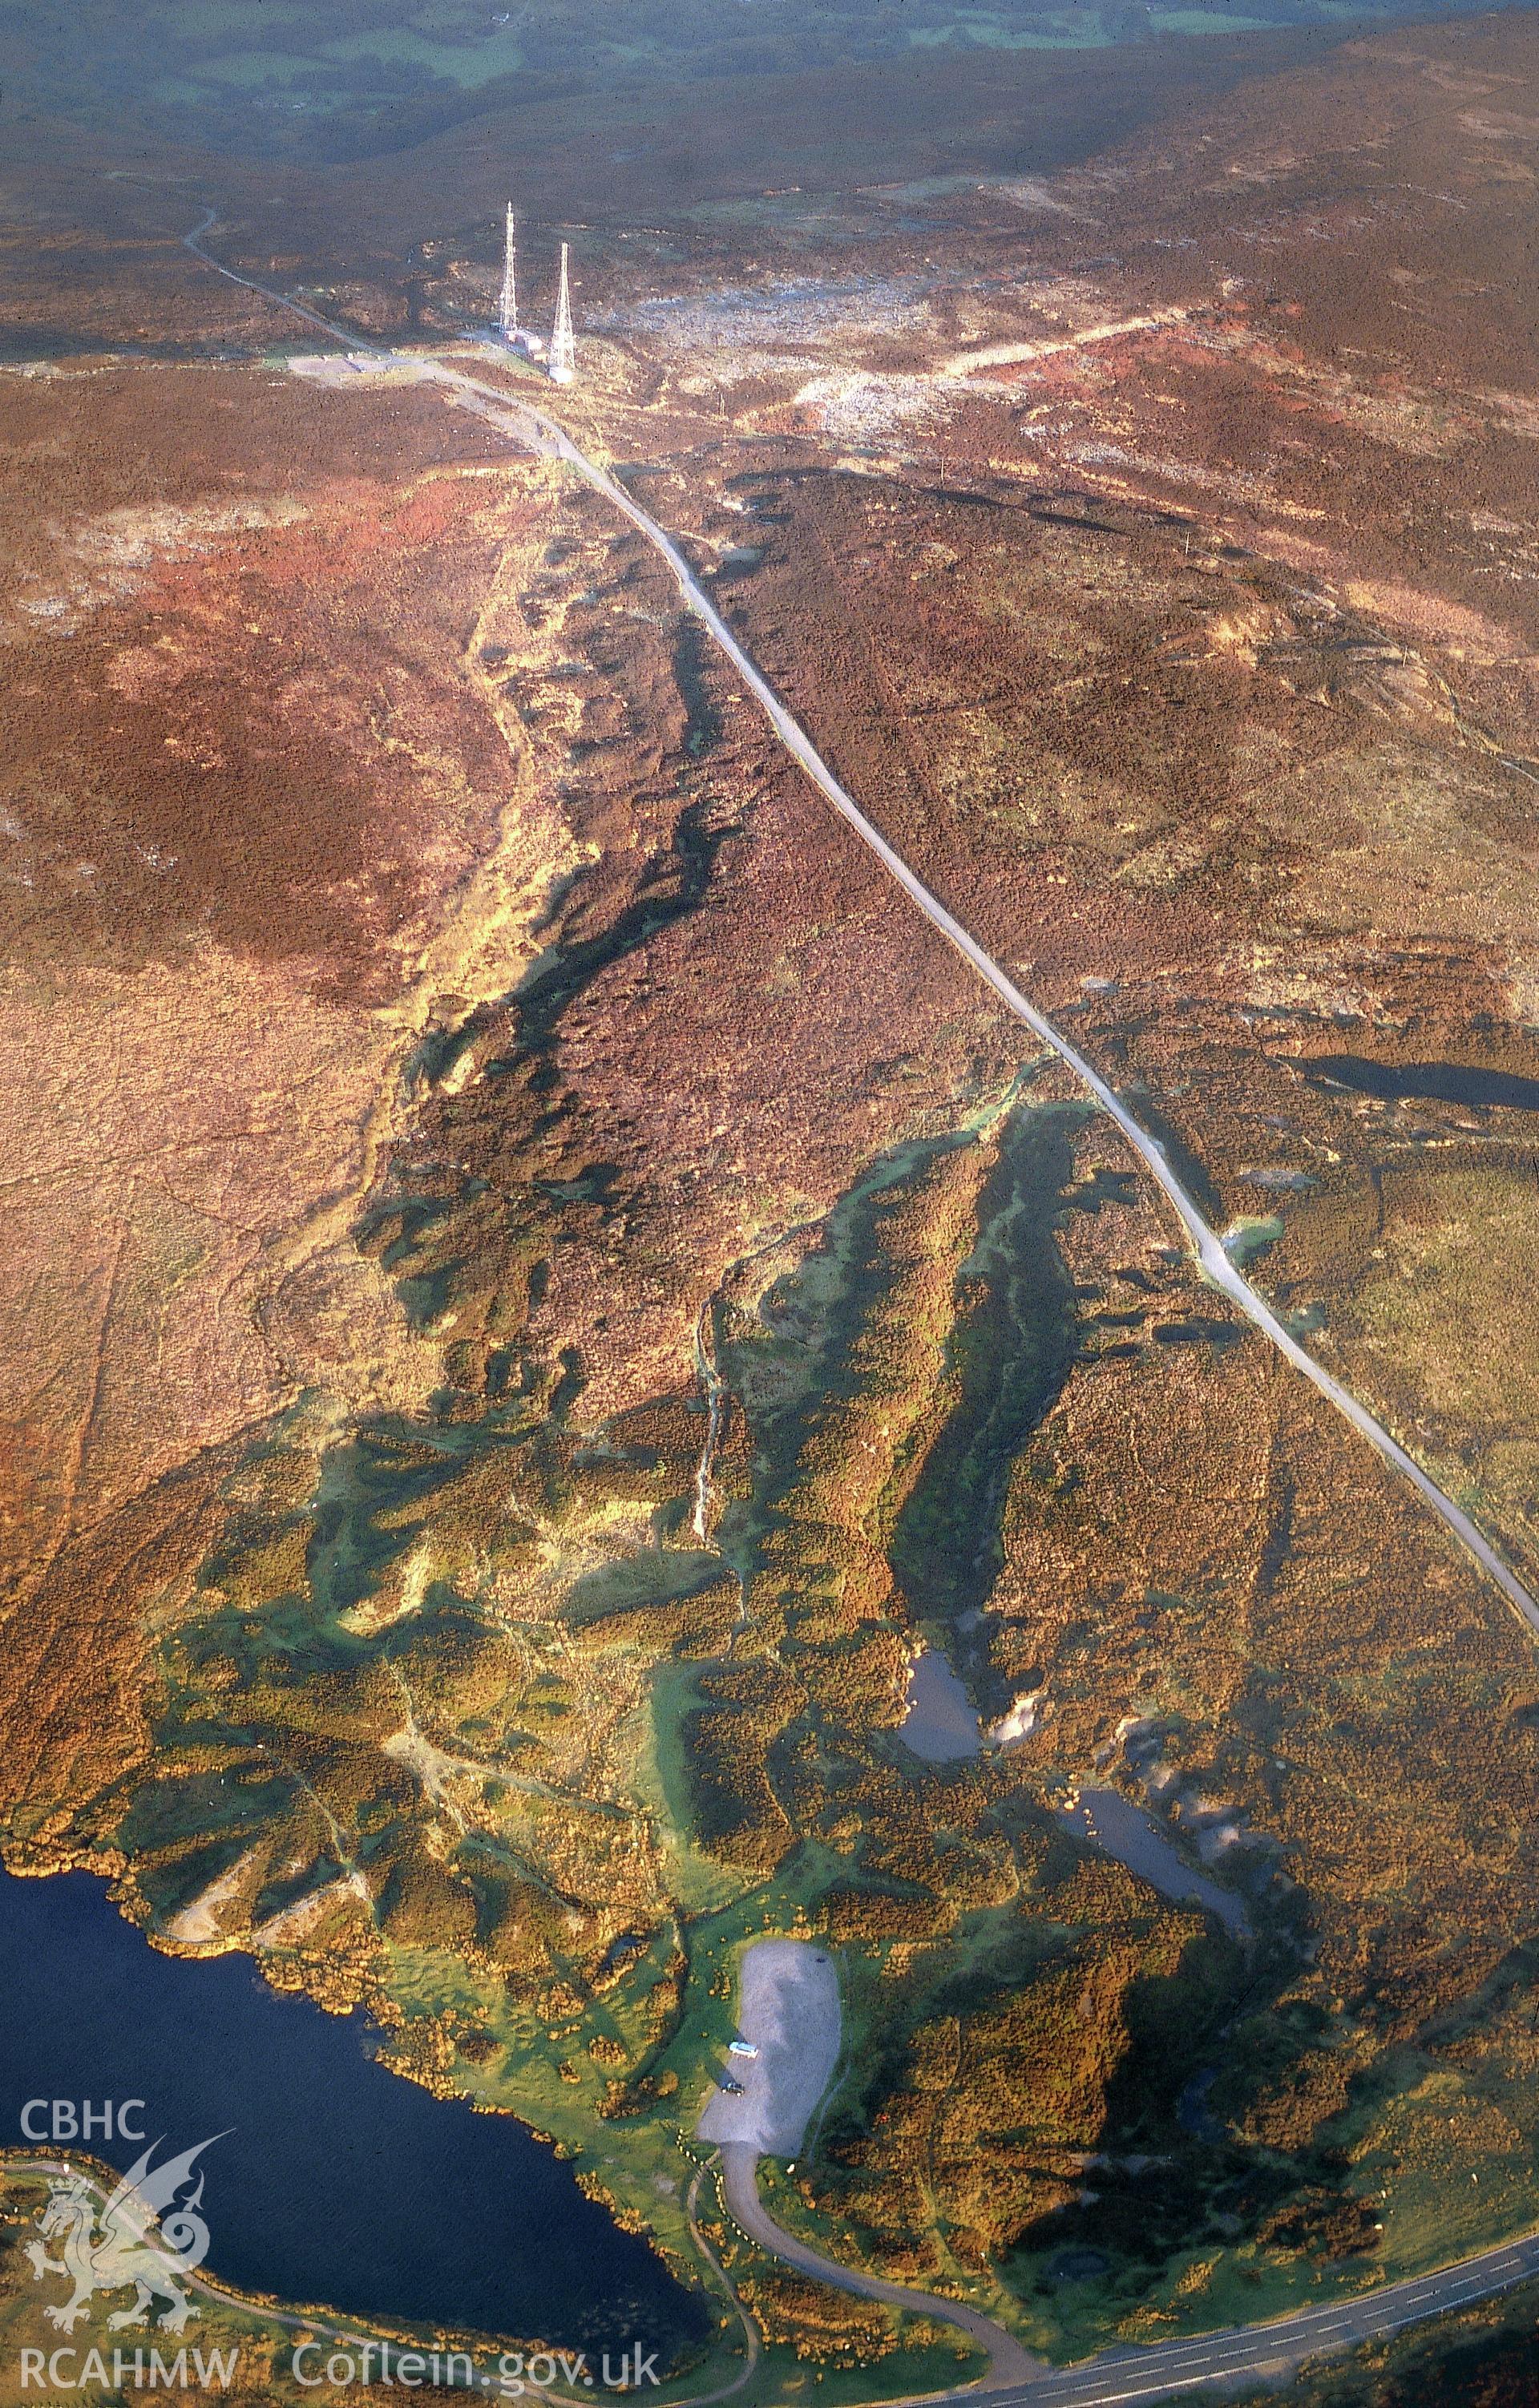 RCAHMW colour slide oblique aerial photograph of Pen-ffordd-goch Iron and Coal Workings, Blaenavon, taken on 18/10/1999 by Toby Driver